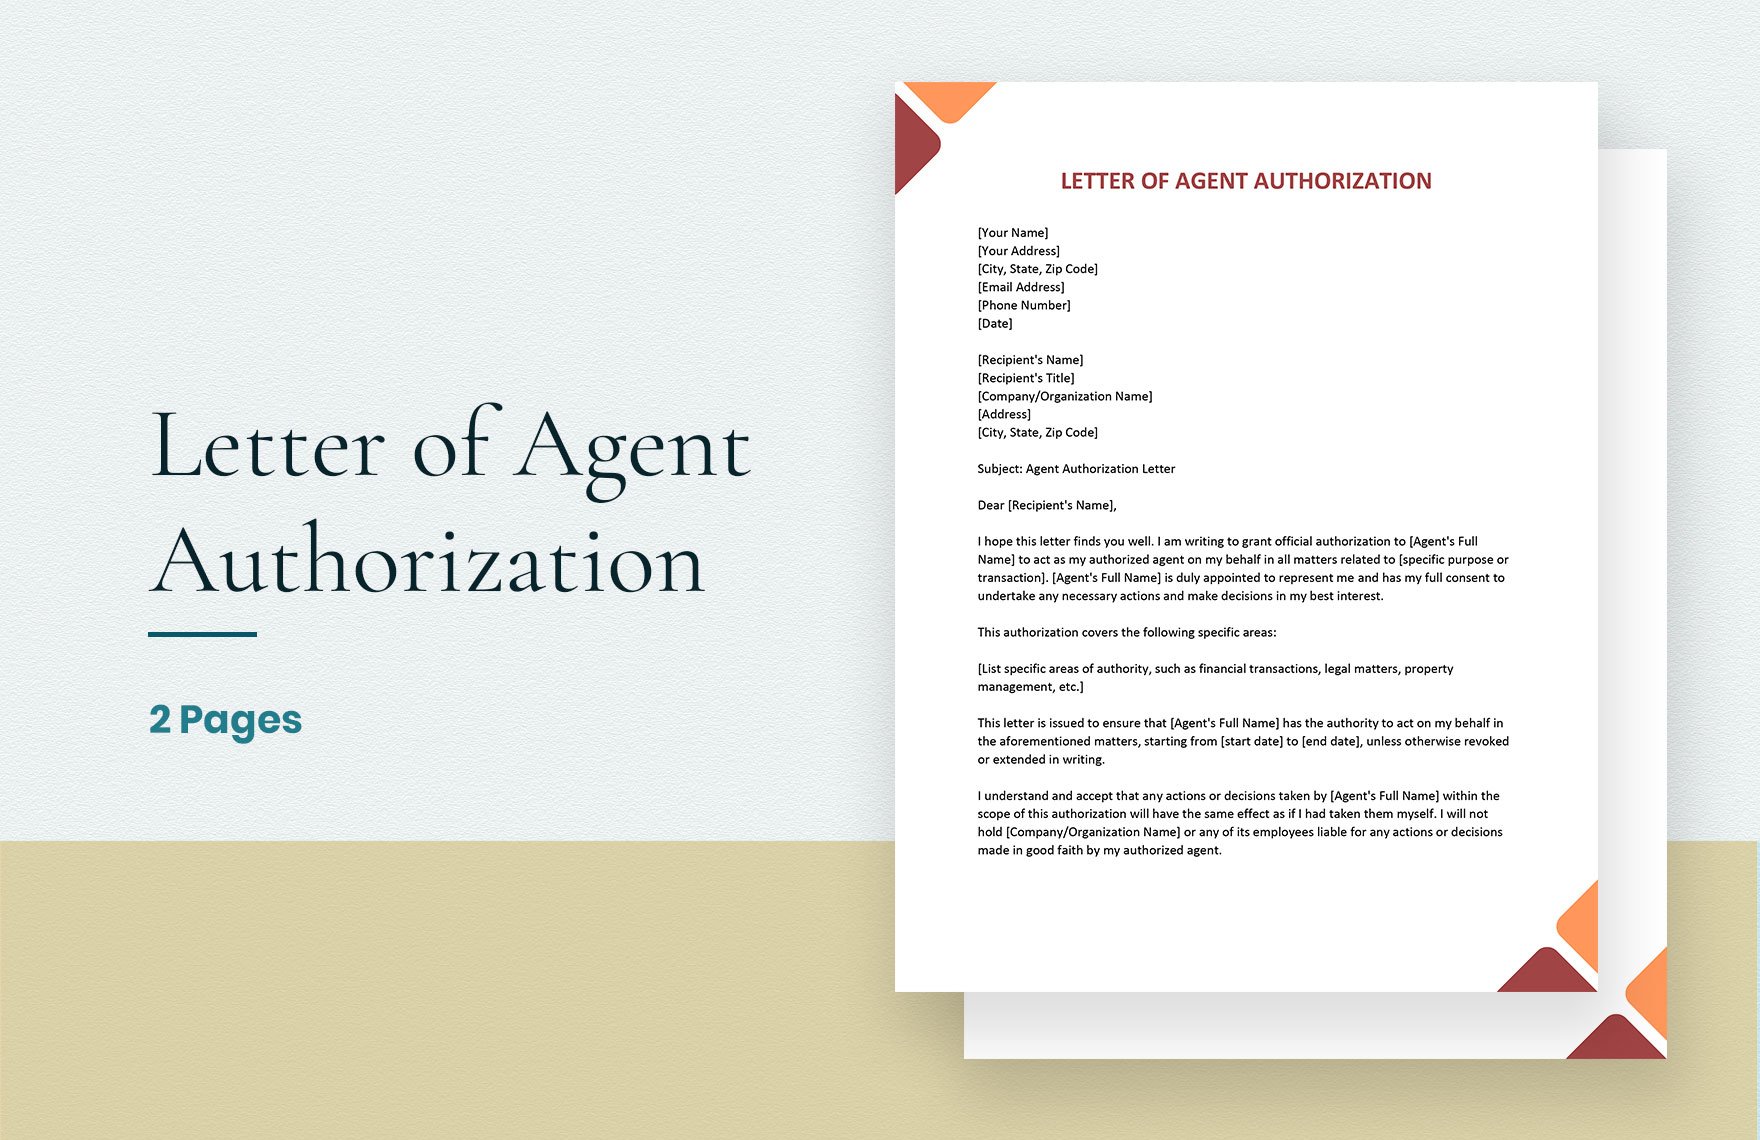 Letter of Agent Authorization